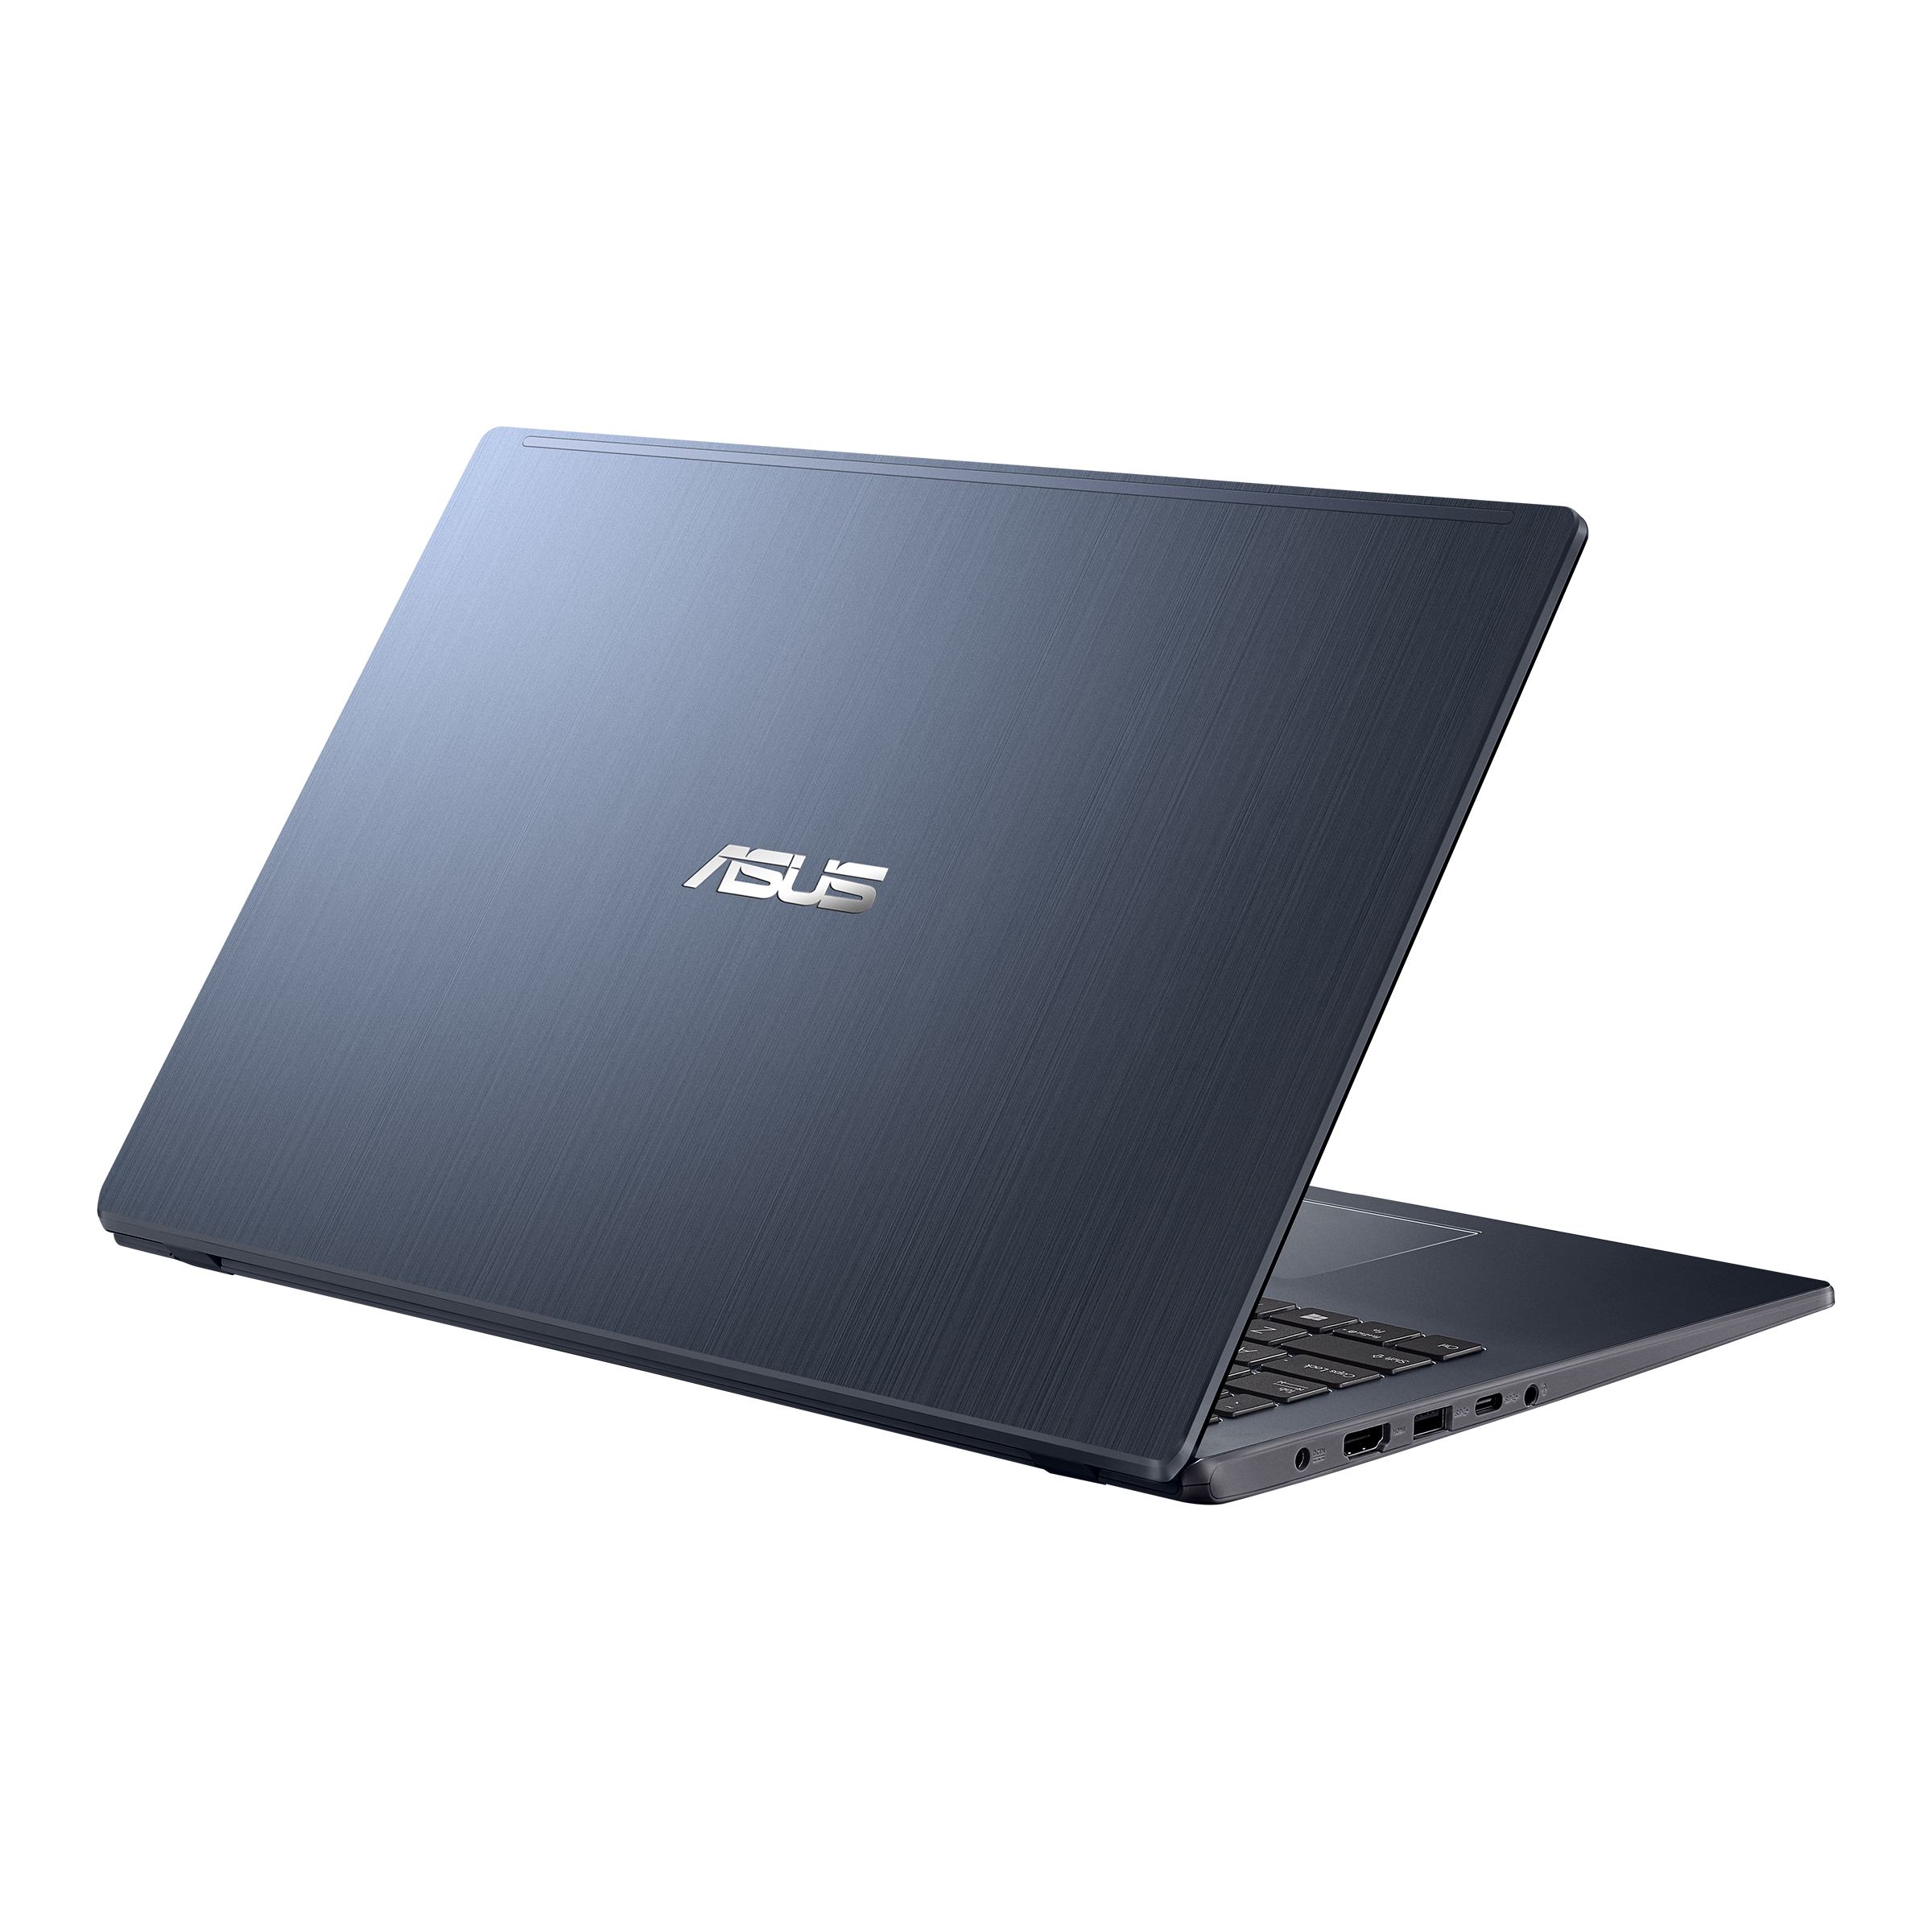 ASUS E510｜Laptops For Home｜ASUS USA